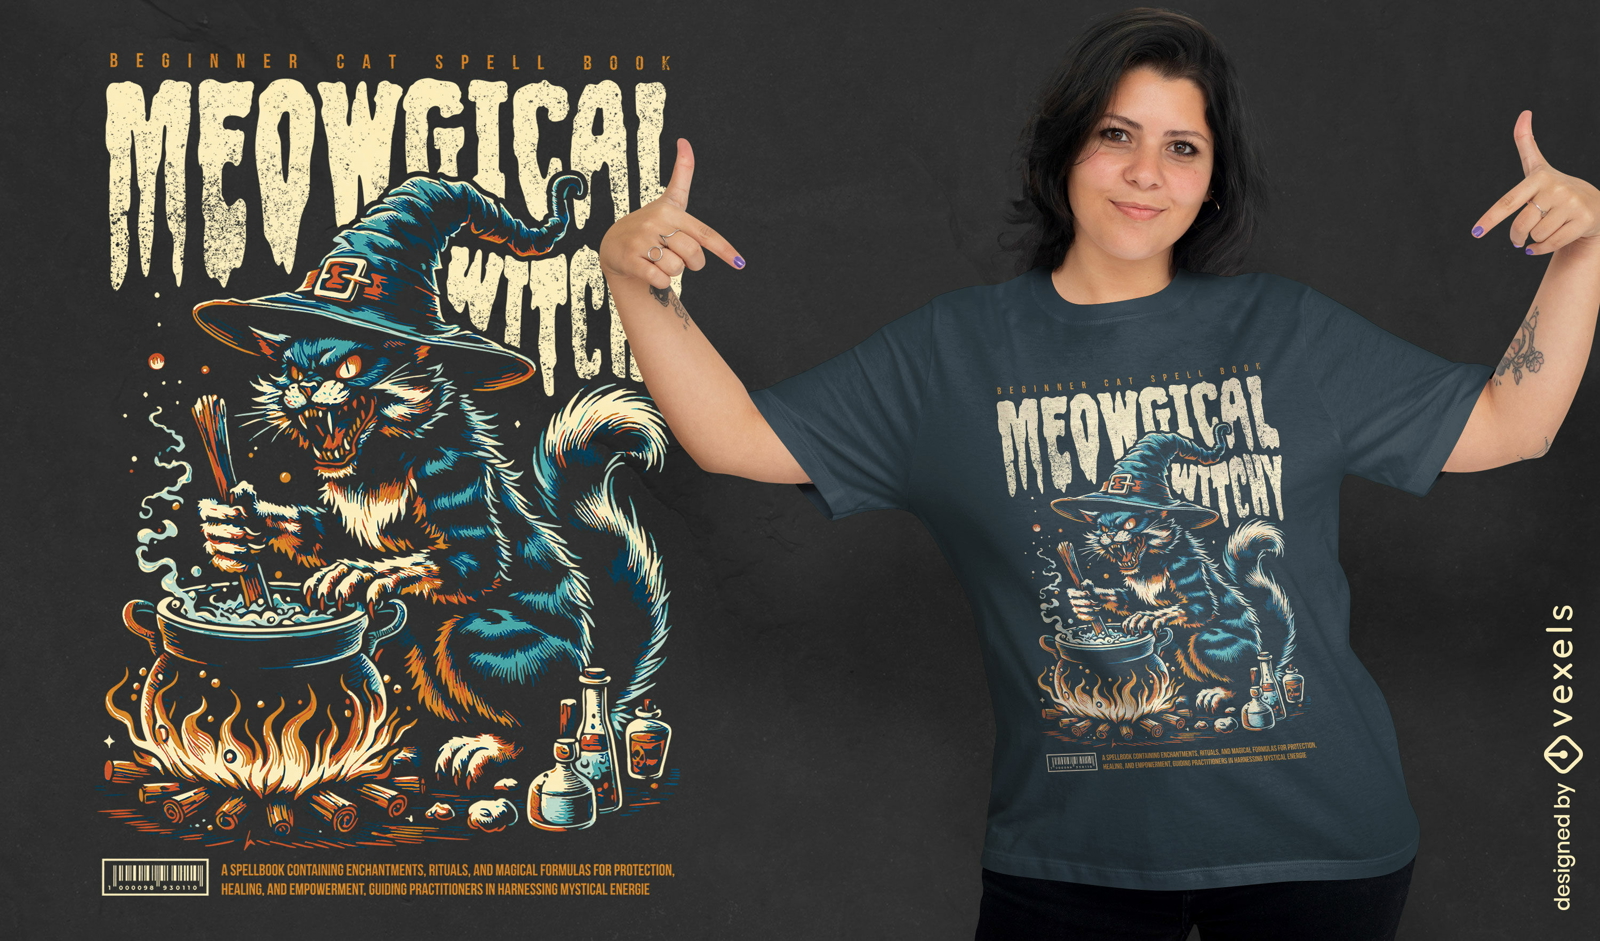 Meowgical witch cat brewing potion t-shirt design